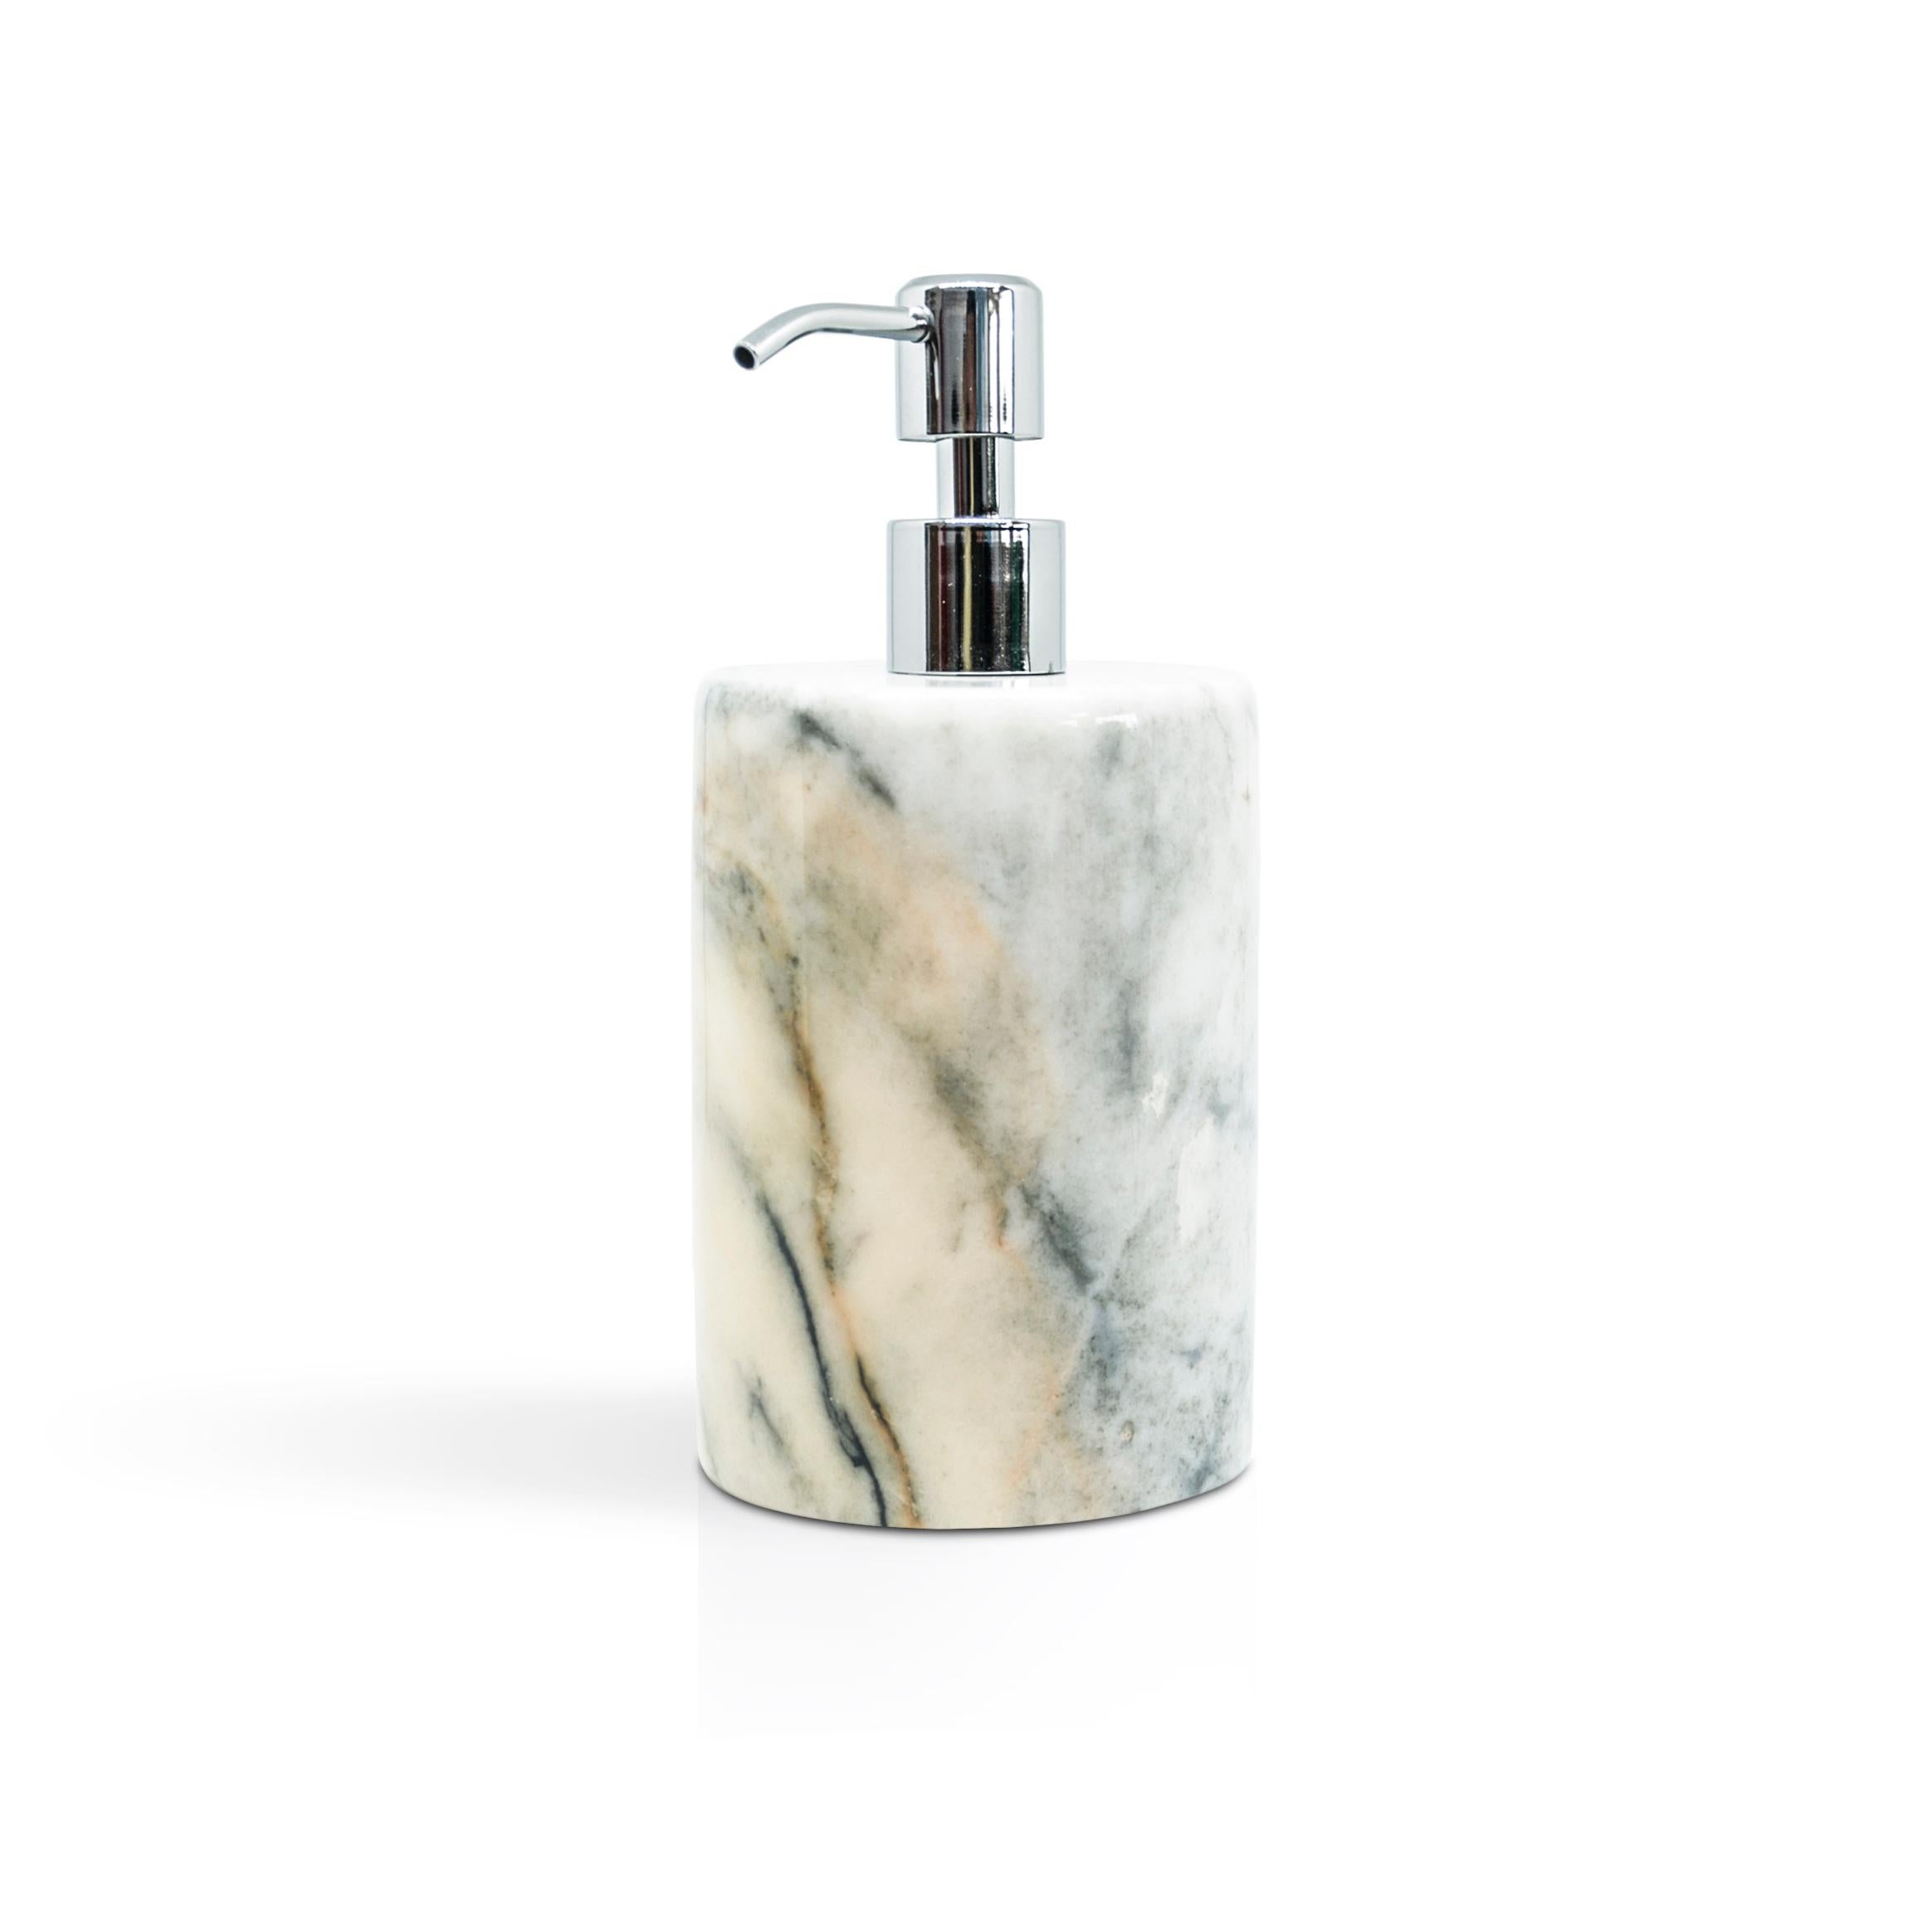 A rounded shape soap dispenser in Paonazzo marble.
Each piece is in a way unique (since each marble block is different in veins and shades) and handcrafted in Italy. Slight variations in shape, color and size are to be considered a guarantee of an